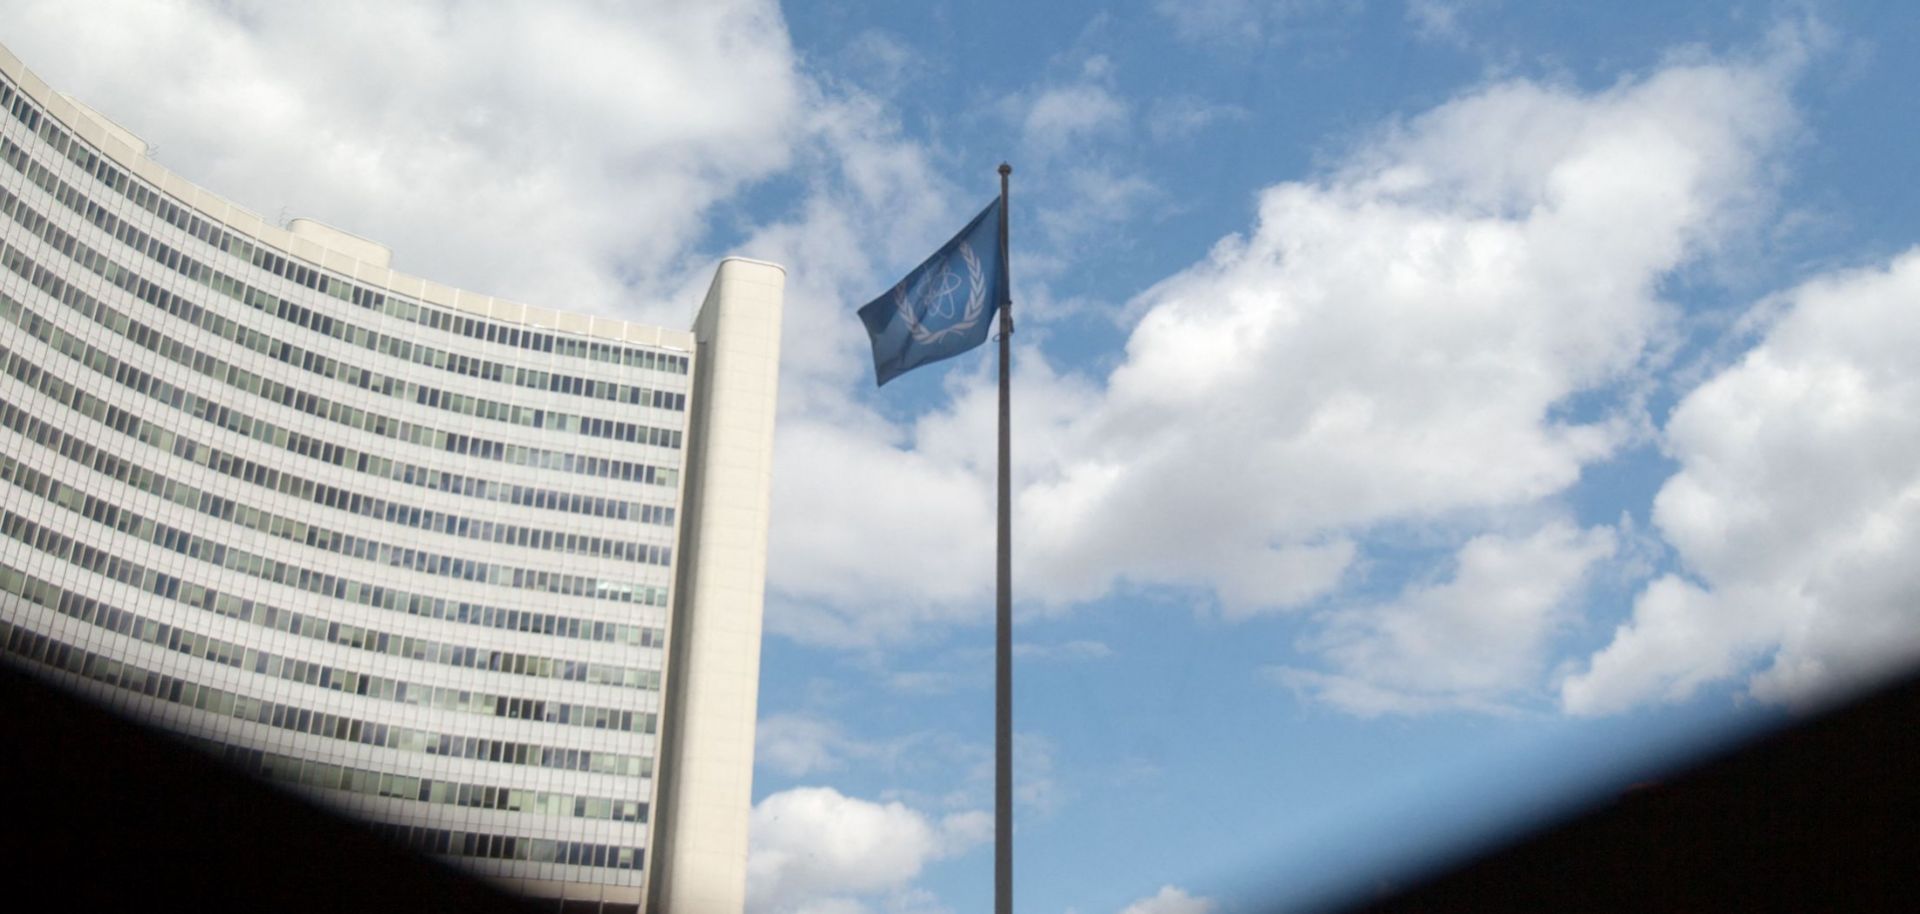 The flag of the International Atomic Energy Agency (IAEA) flutters in front of the IAEA building in Vienna, Austria, on July 10, 2019.